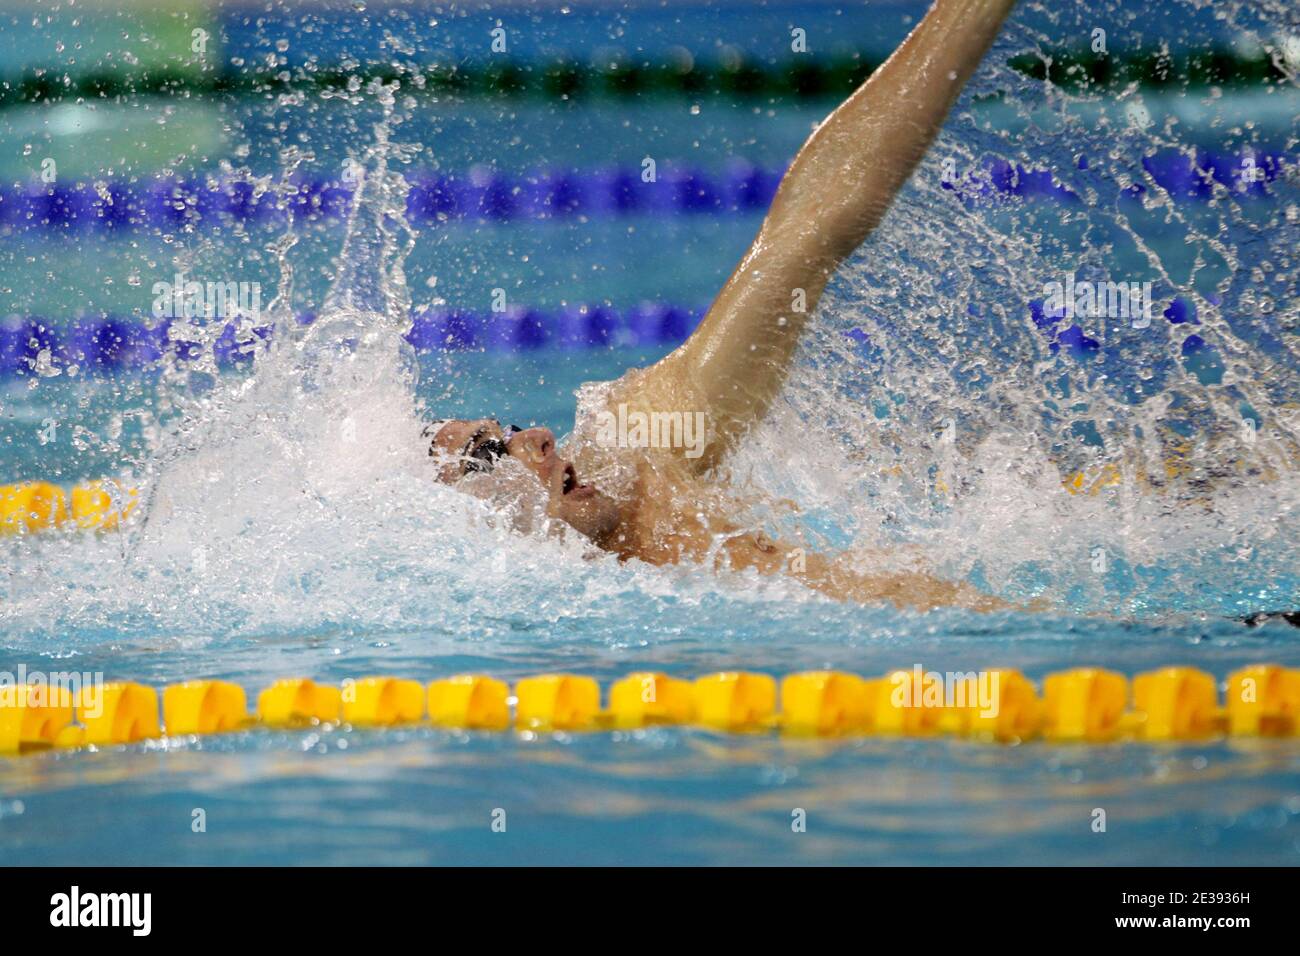 Camille Lacourt of France wins the silver medal in the final of the Men's 100m Backstroke during the 10th FINA World Swimming Championships (25m) at the Hamdan bin Mohammed bin Rashid Sports Complex in Dubai, United Arab Emirates on December 16, 2010. Photo by Ammar Abd Rabbo/ABACAPRESS.COM Stock Photo